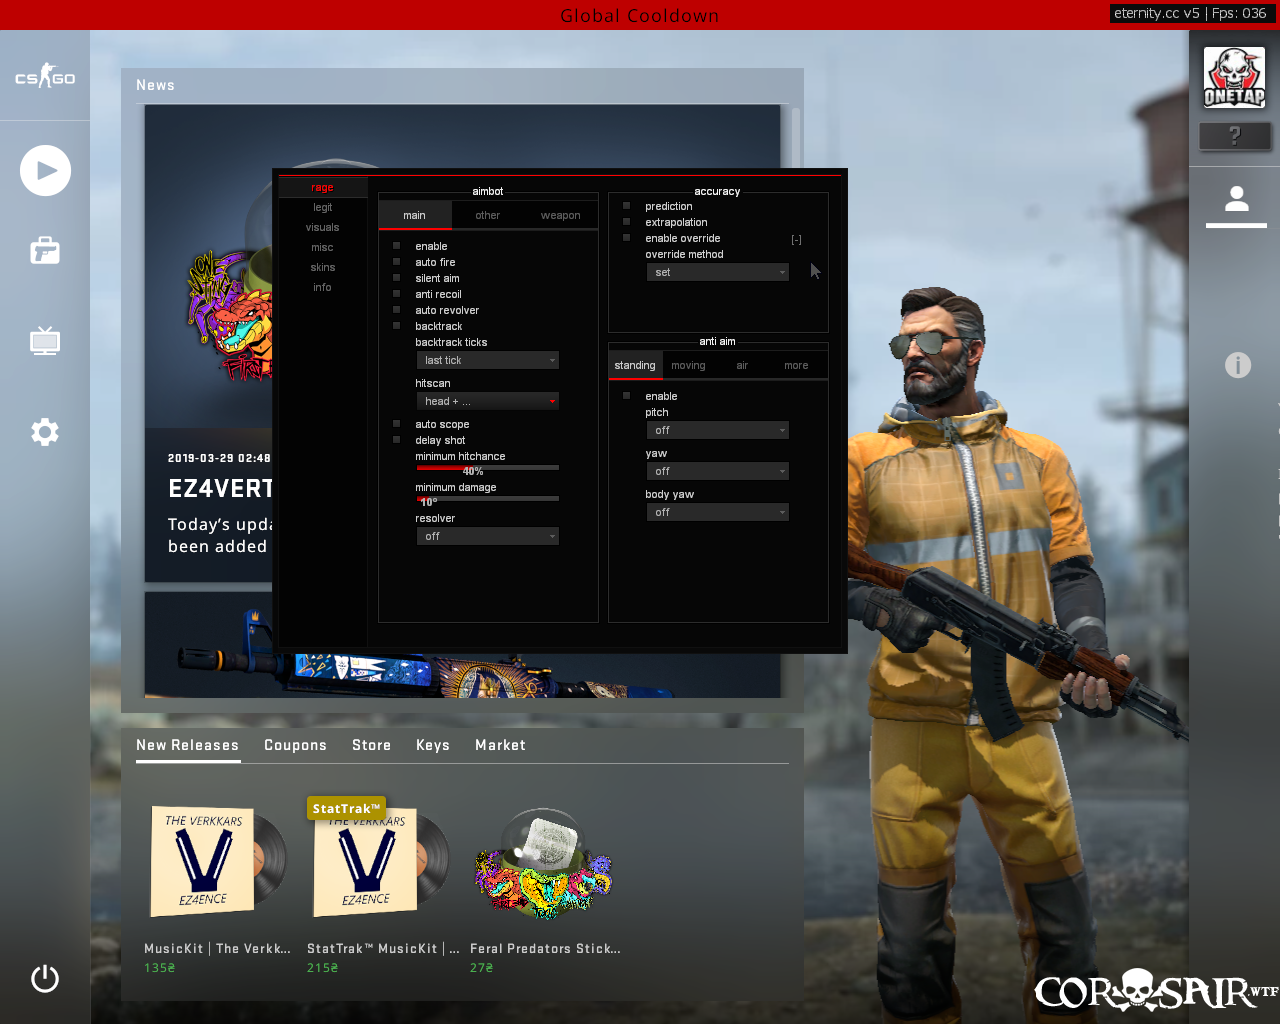 Use At Own Risk Eternity Cc V15 Best Free Csgo Cheat Released